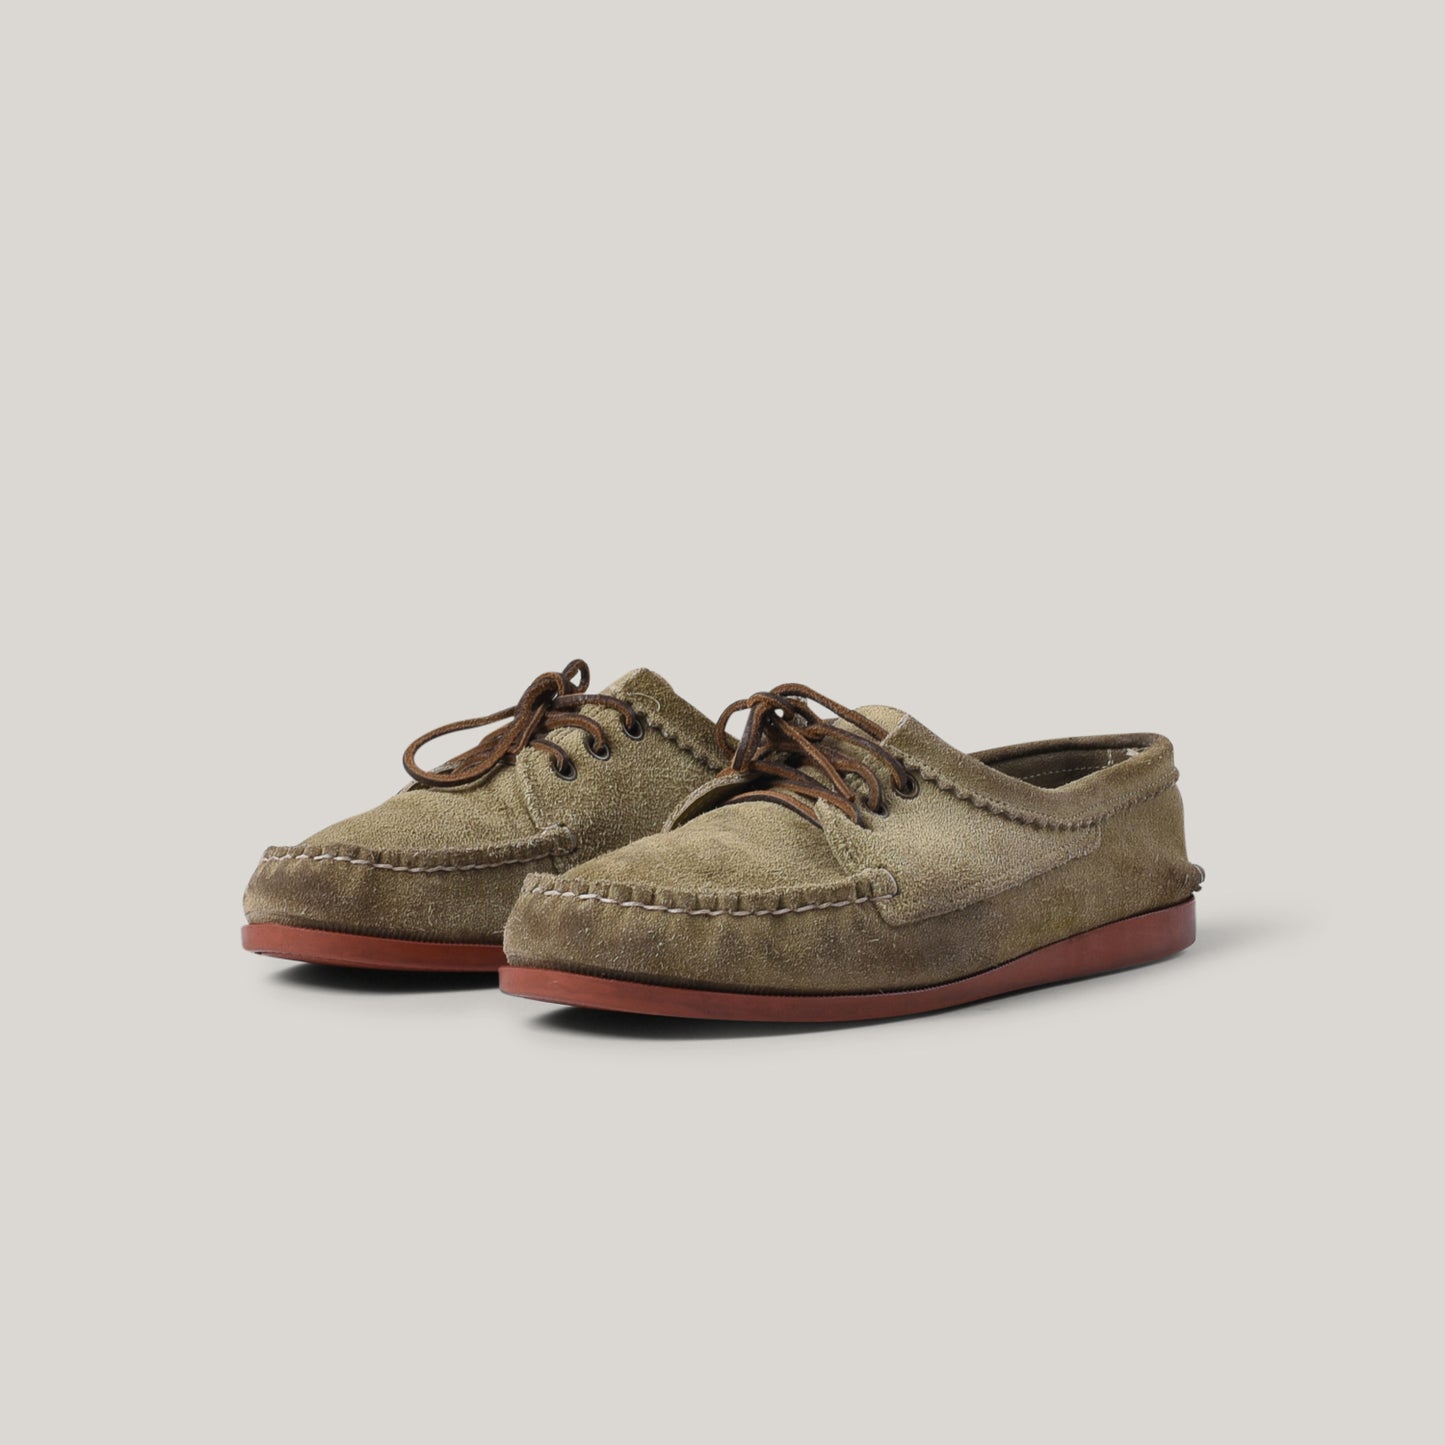 USED QUODDY TRAIL x SOUTH WILLARD BOAT SHOES - LIGHT OLIVE